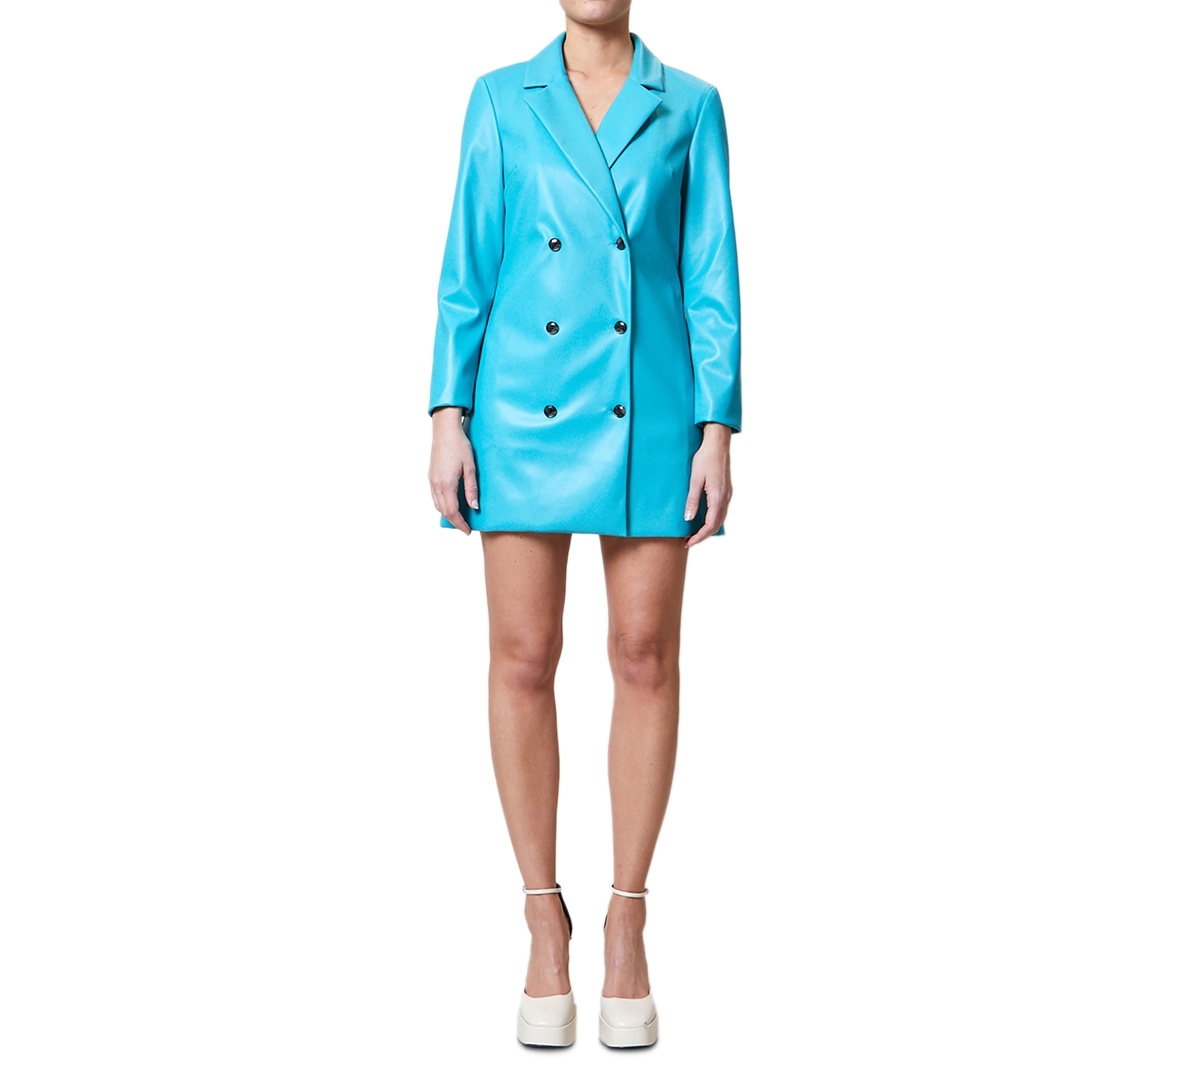 French Connection Women's Crolenda Faux-leather Blazer Dress In Jaded Teal